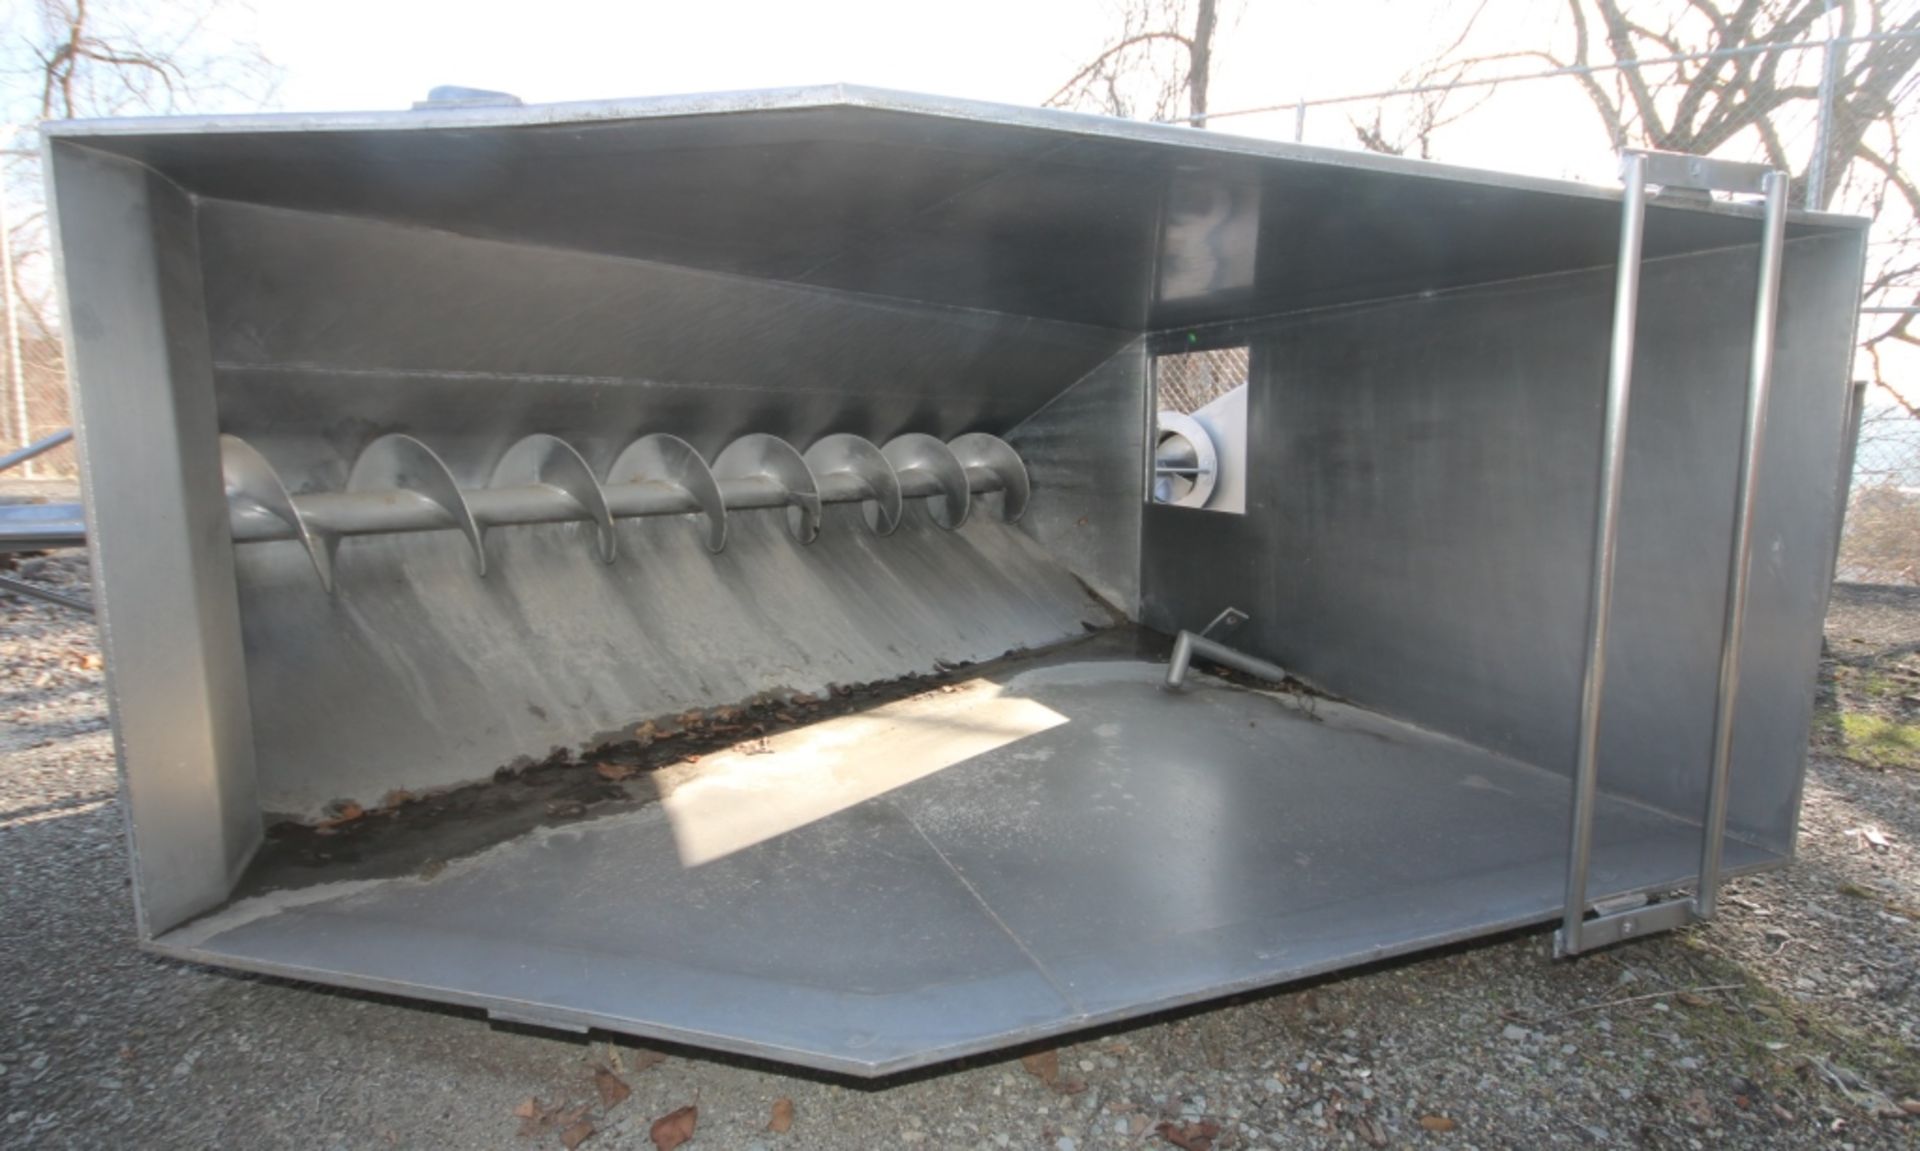 Aprox. 8 ft L x 37" W x 90" H S/S AugerBox with 12" S/S Auger (INV#77750)(Located @ the MDG Showroom - Image 3 of 4